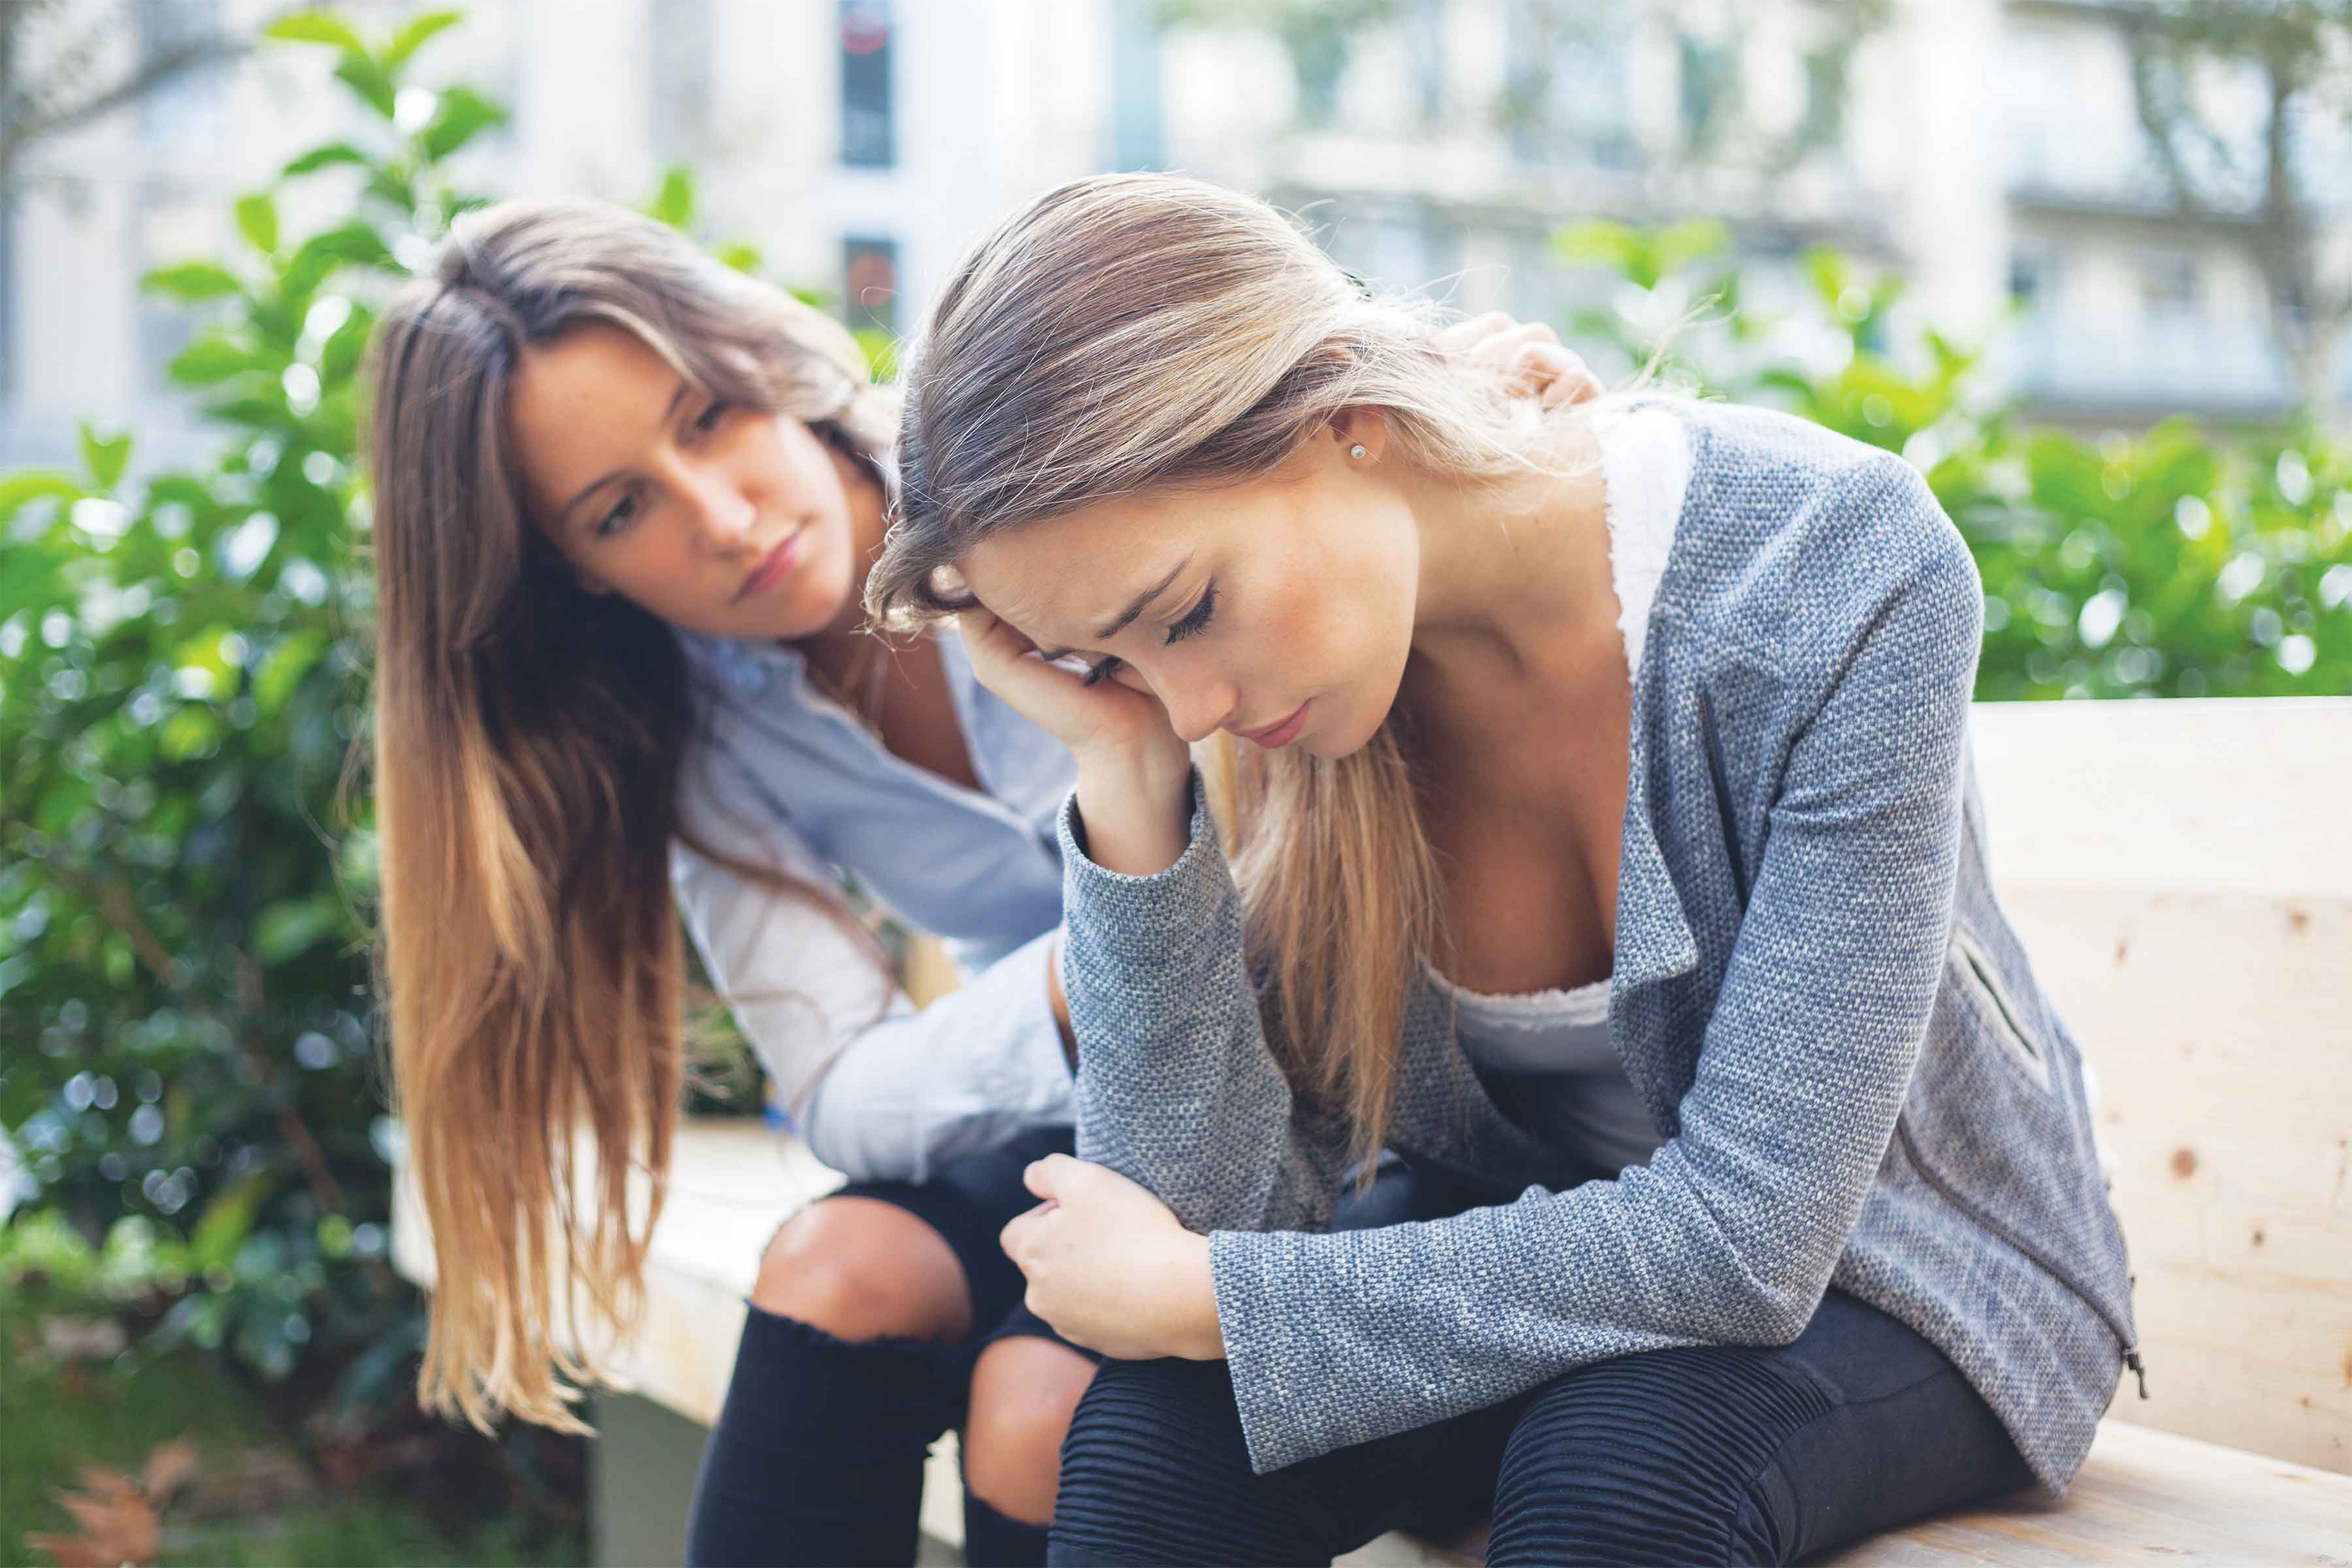 10 Signs That A Friendship Is Toxic